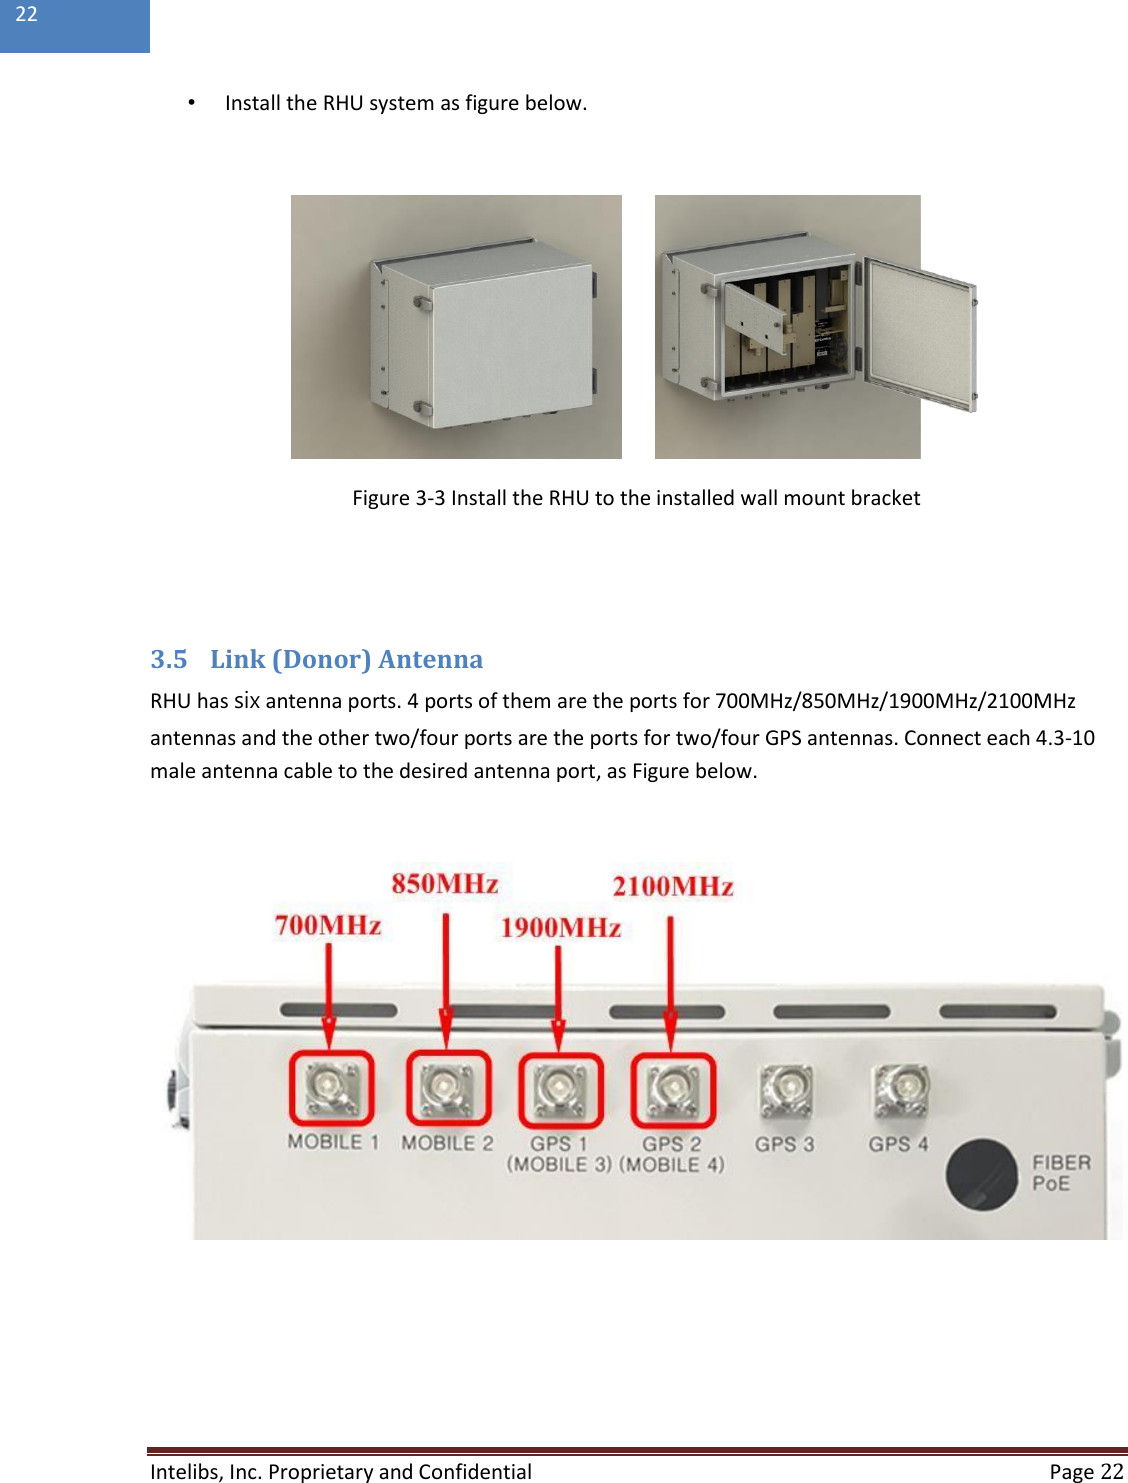  Intelibs, Inc. Proprietary and Confidential   Page 22  22  • Install the RHU system as figure below.           Figure 3-3 Install the RHU to the installed wall mount bracket   3.5 Link (Donor) Antenna RHU has six antenna ports. 4 ports of them are the ports for 700MHz/850MHz/1900MHz/2100MHz antennas and the other two/four ports are the ports for two/four GPS antennas. Connect each 4.3-10 male antenna cable to the desired antenna port, as Figure below.     